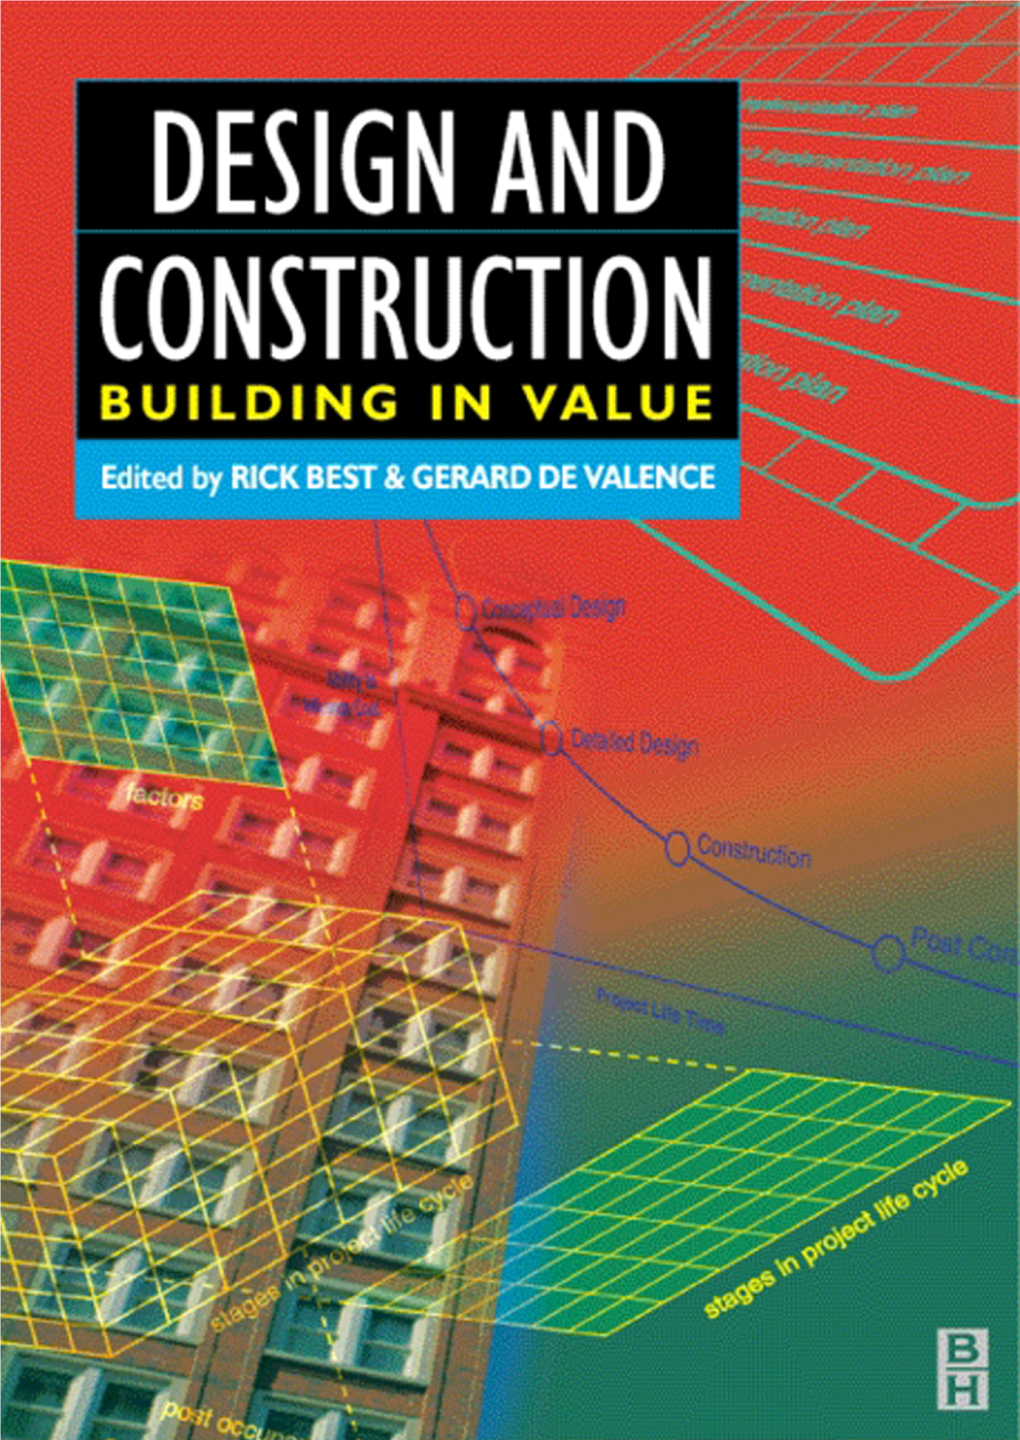 Design-And-Construction-Building-In-Value.Pdf